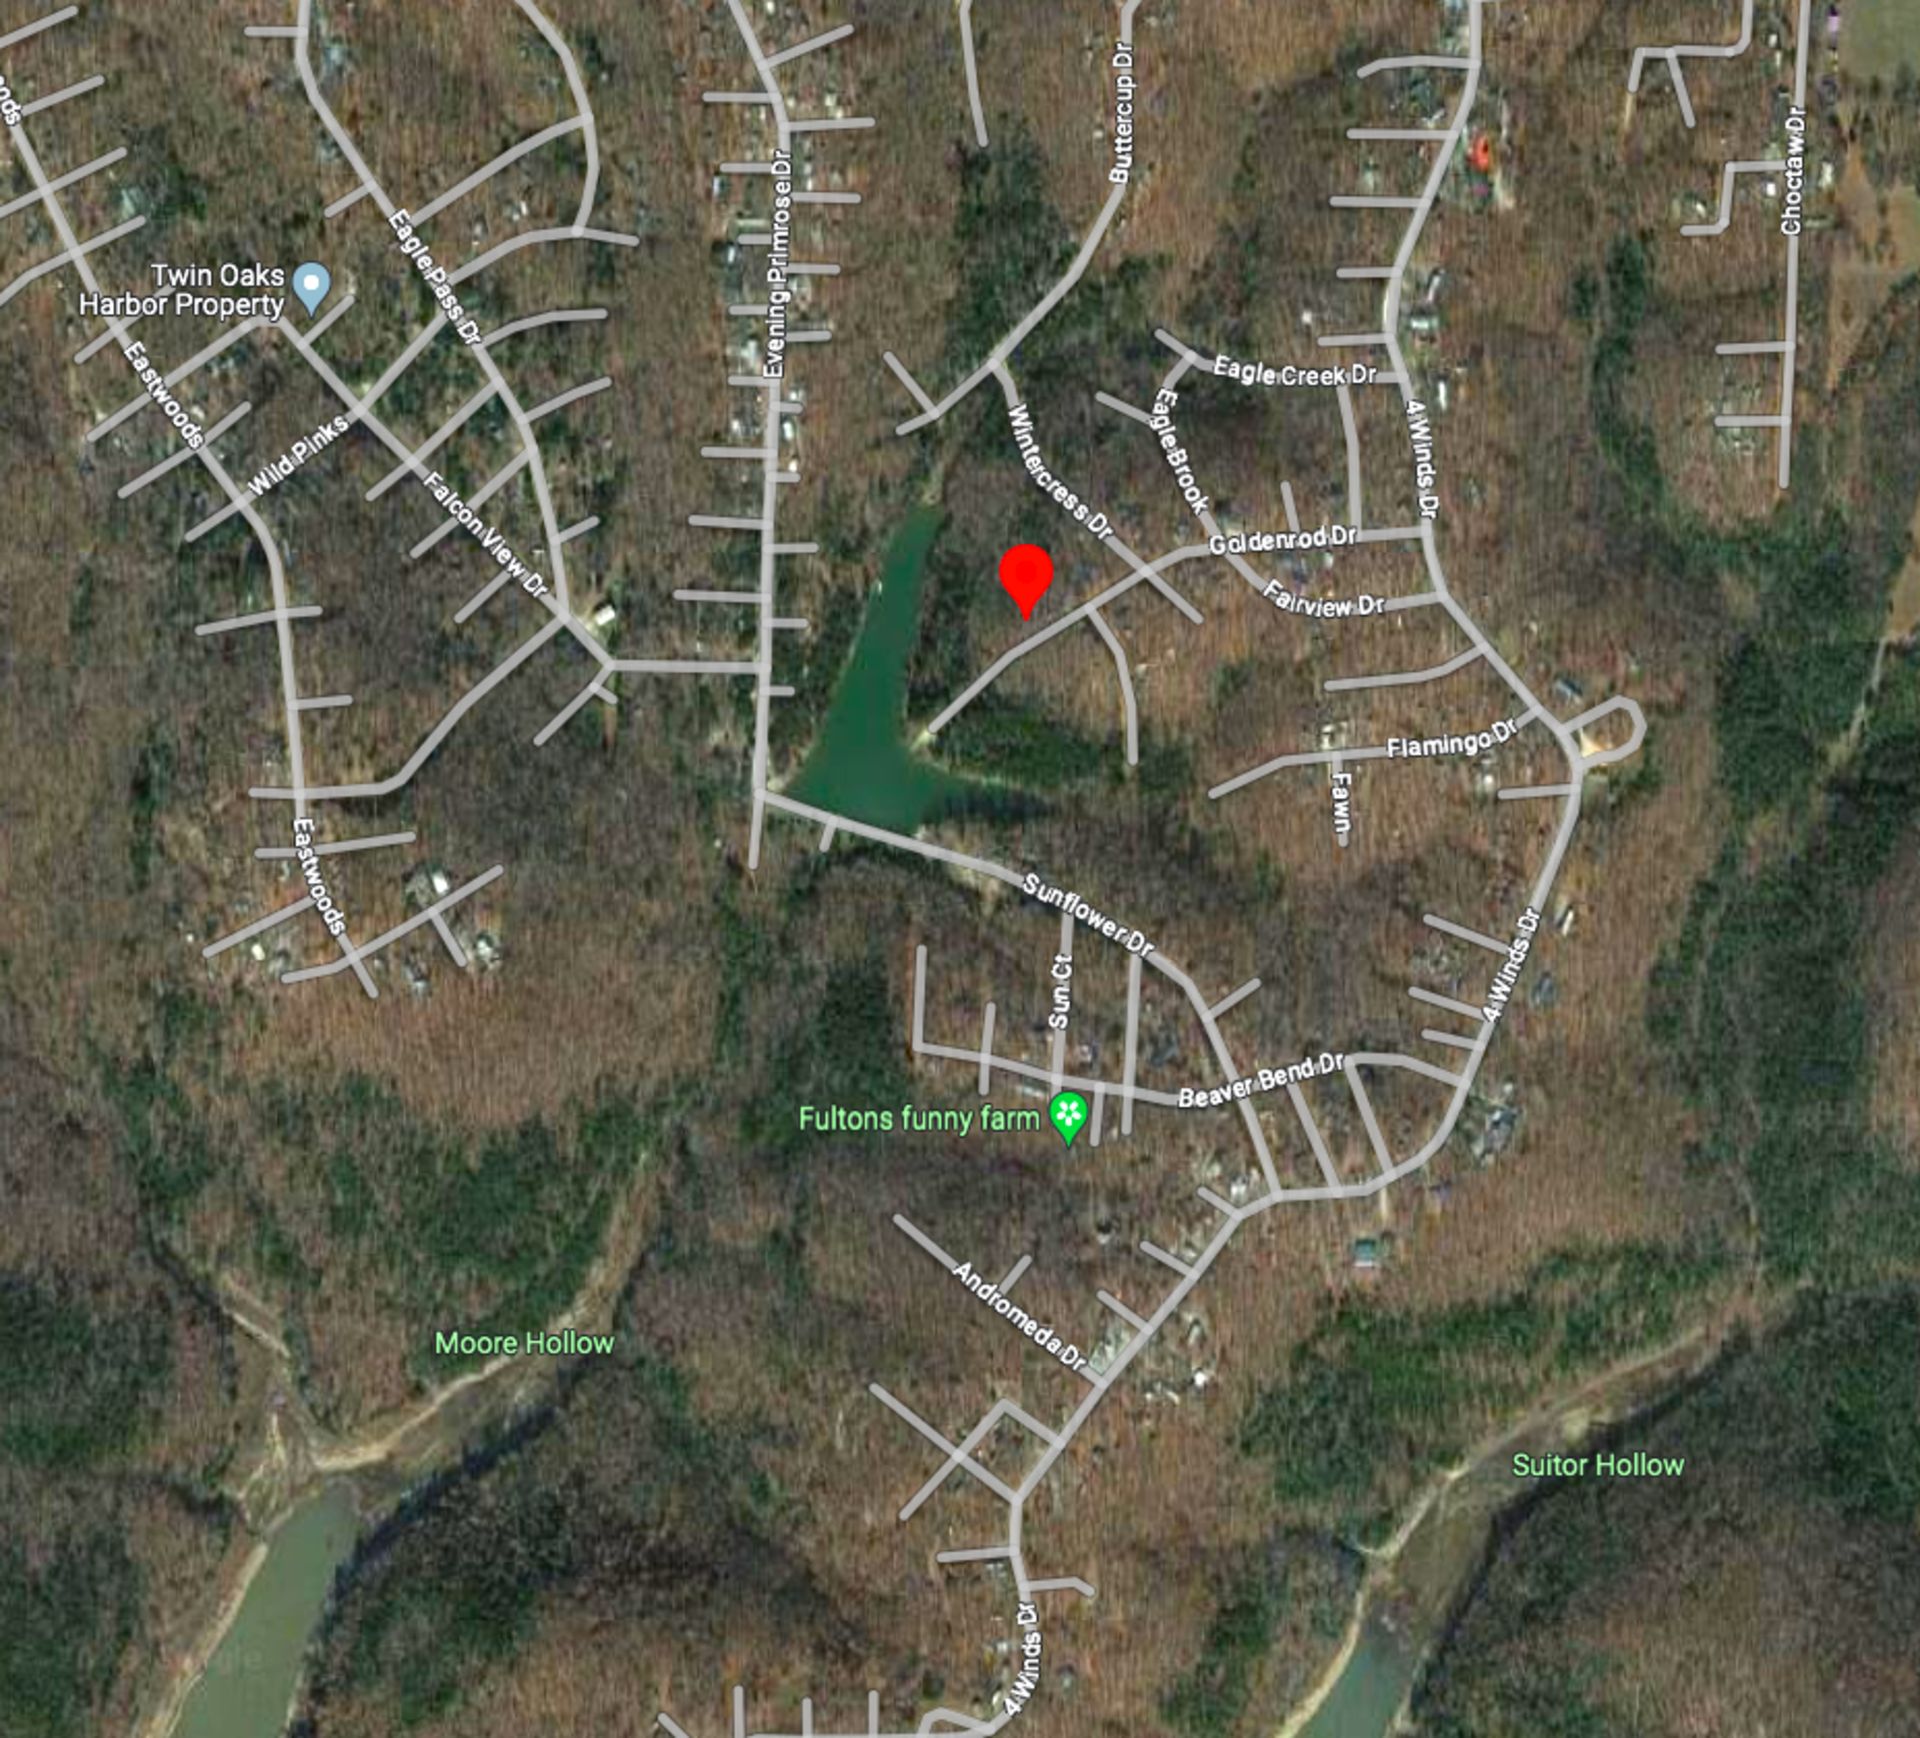 Exclusive Camping Lot in Missouri's Twin Oaks Harbor Community! - Image 11 of 13